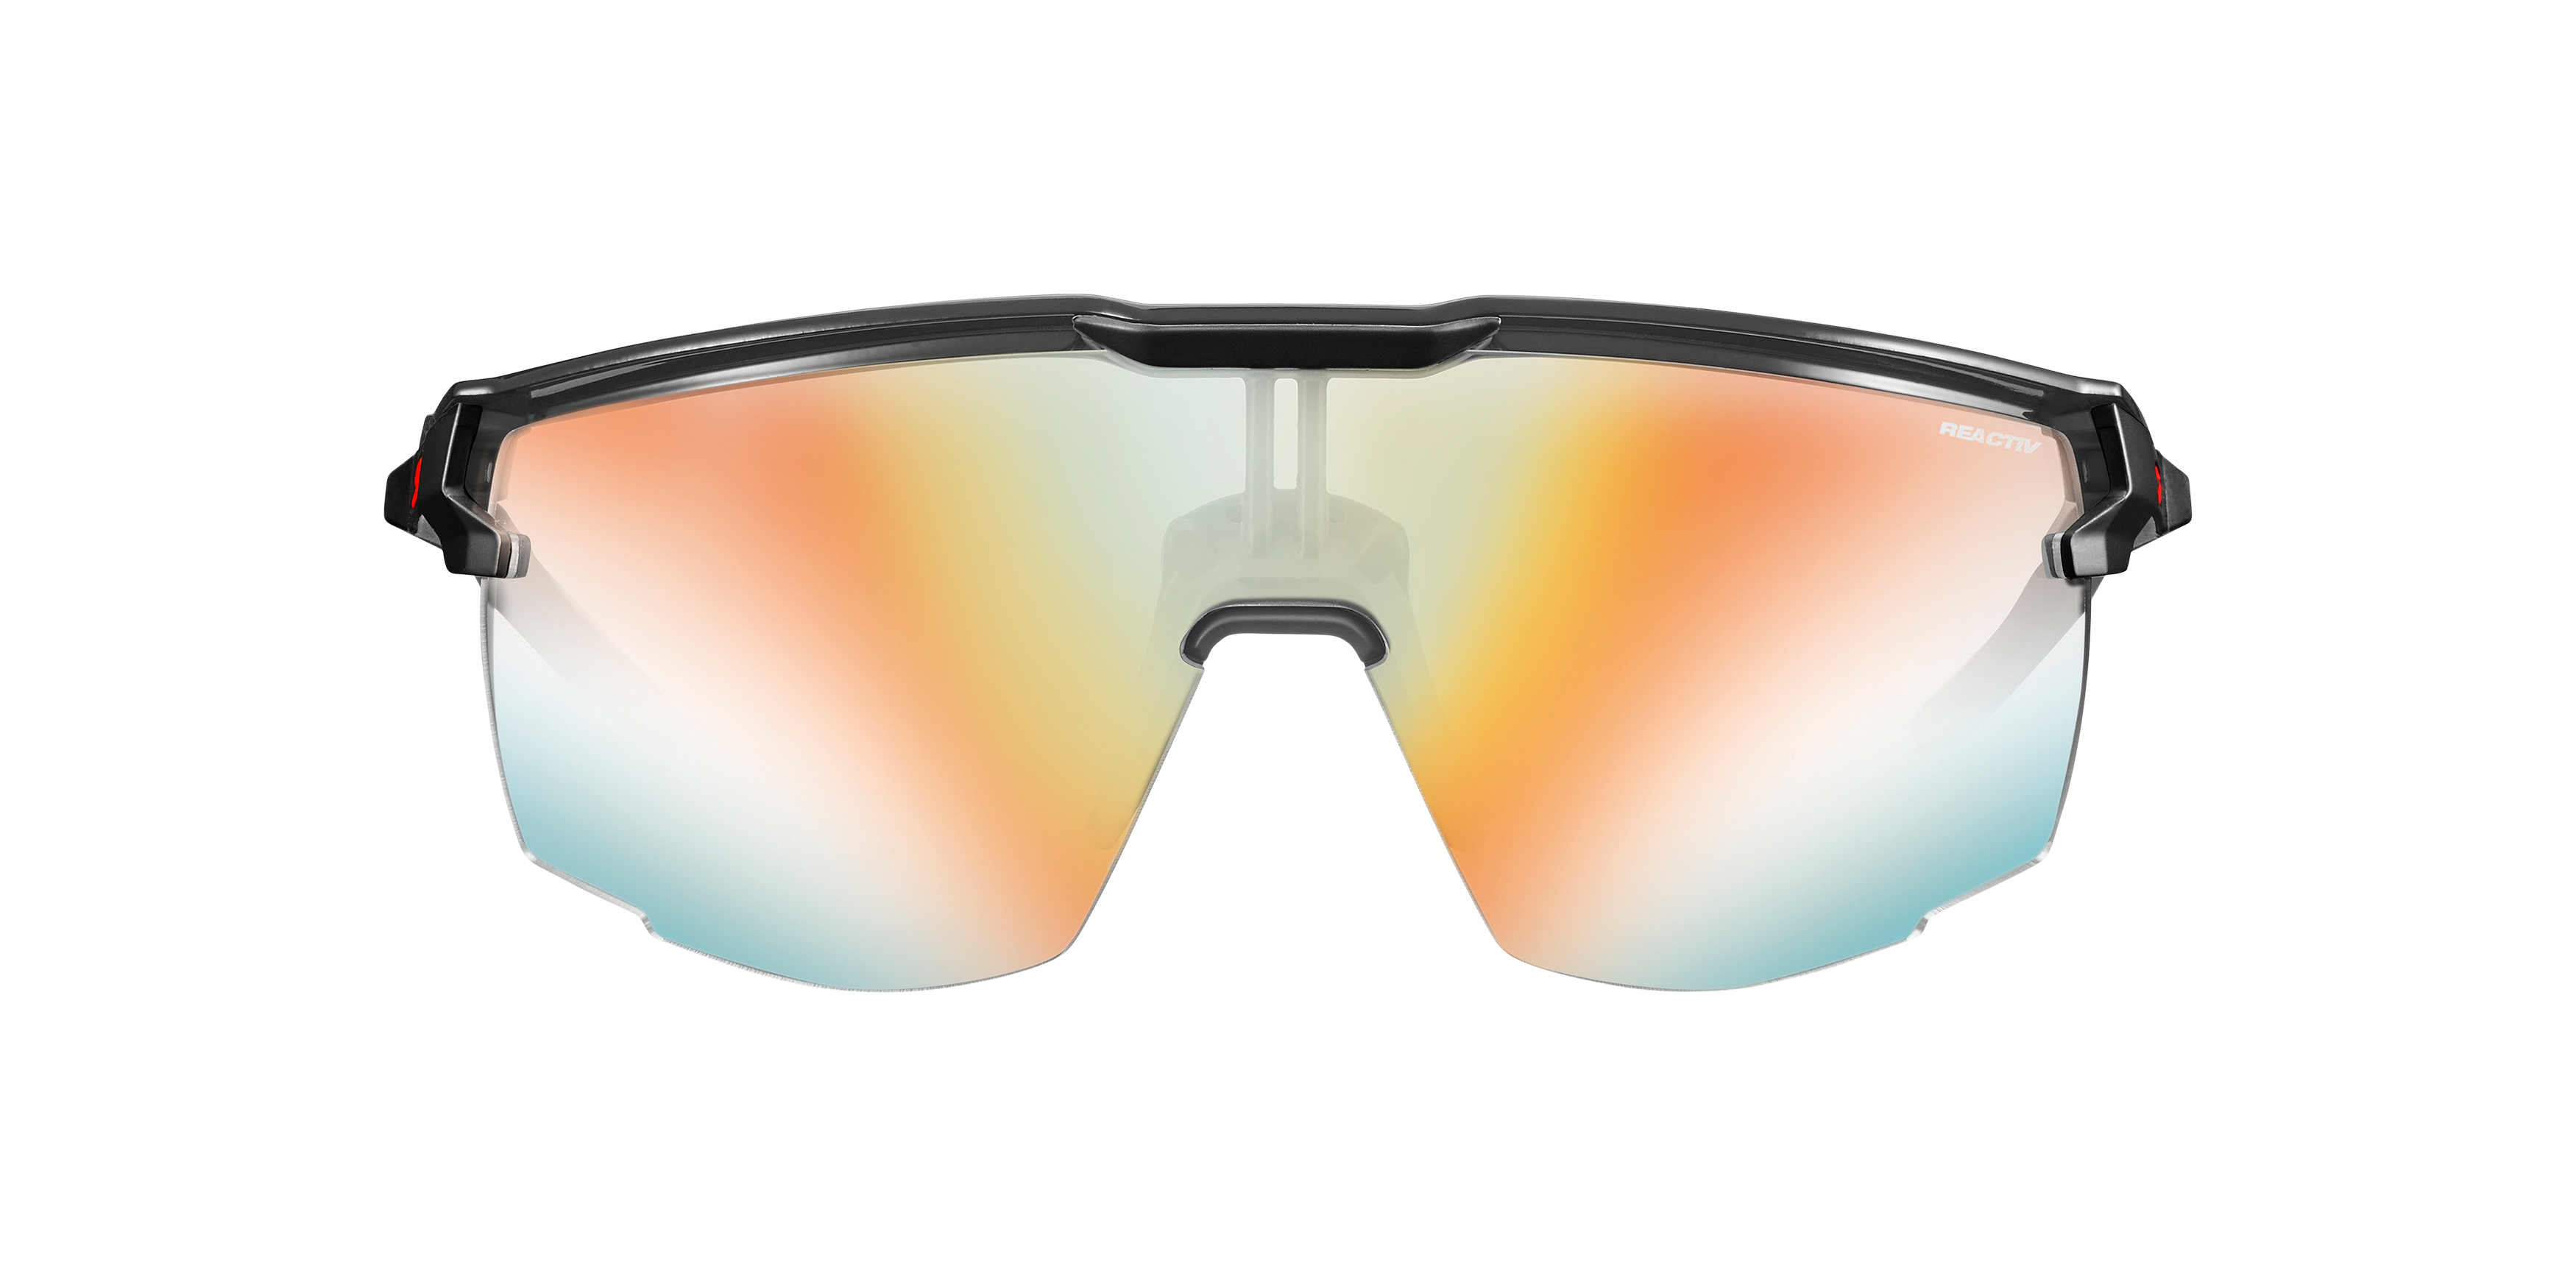 [products.image.front] Julbo ULTIMATE J546 3314